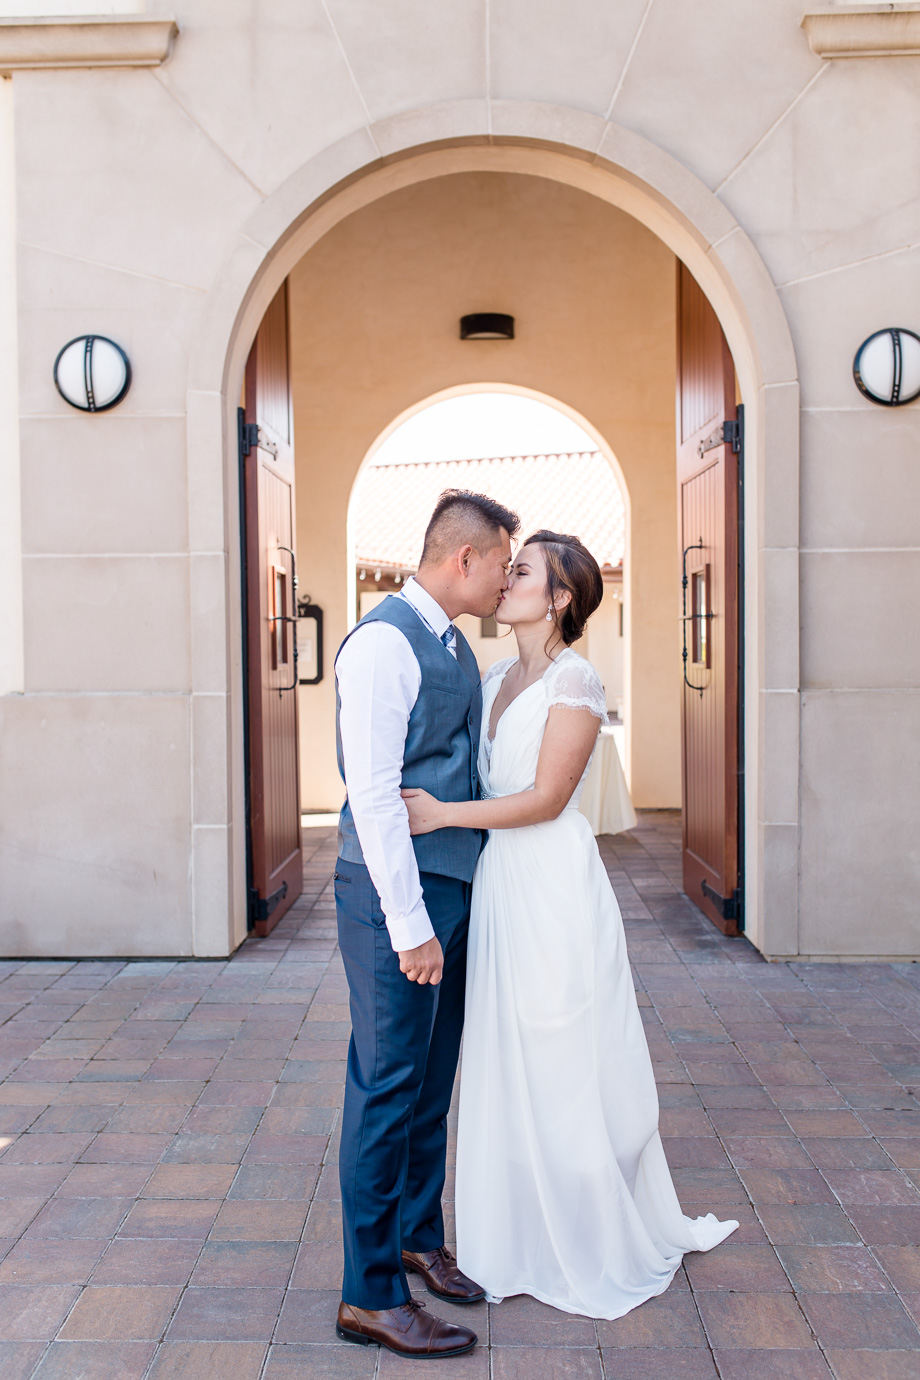 the door to their happy future - winery wedding picture